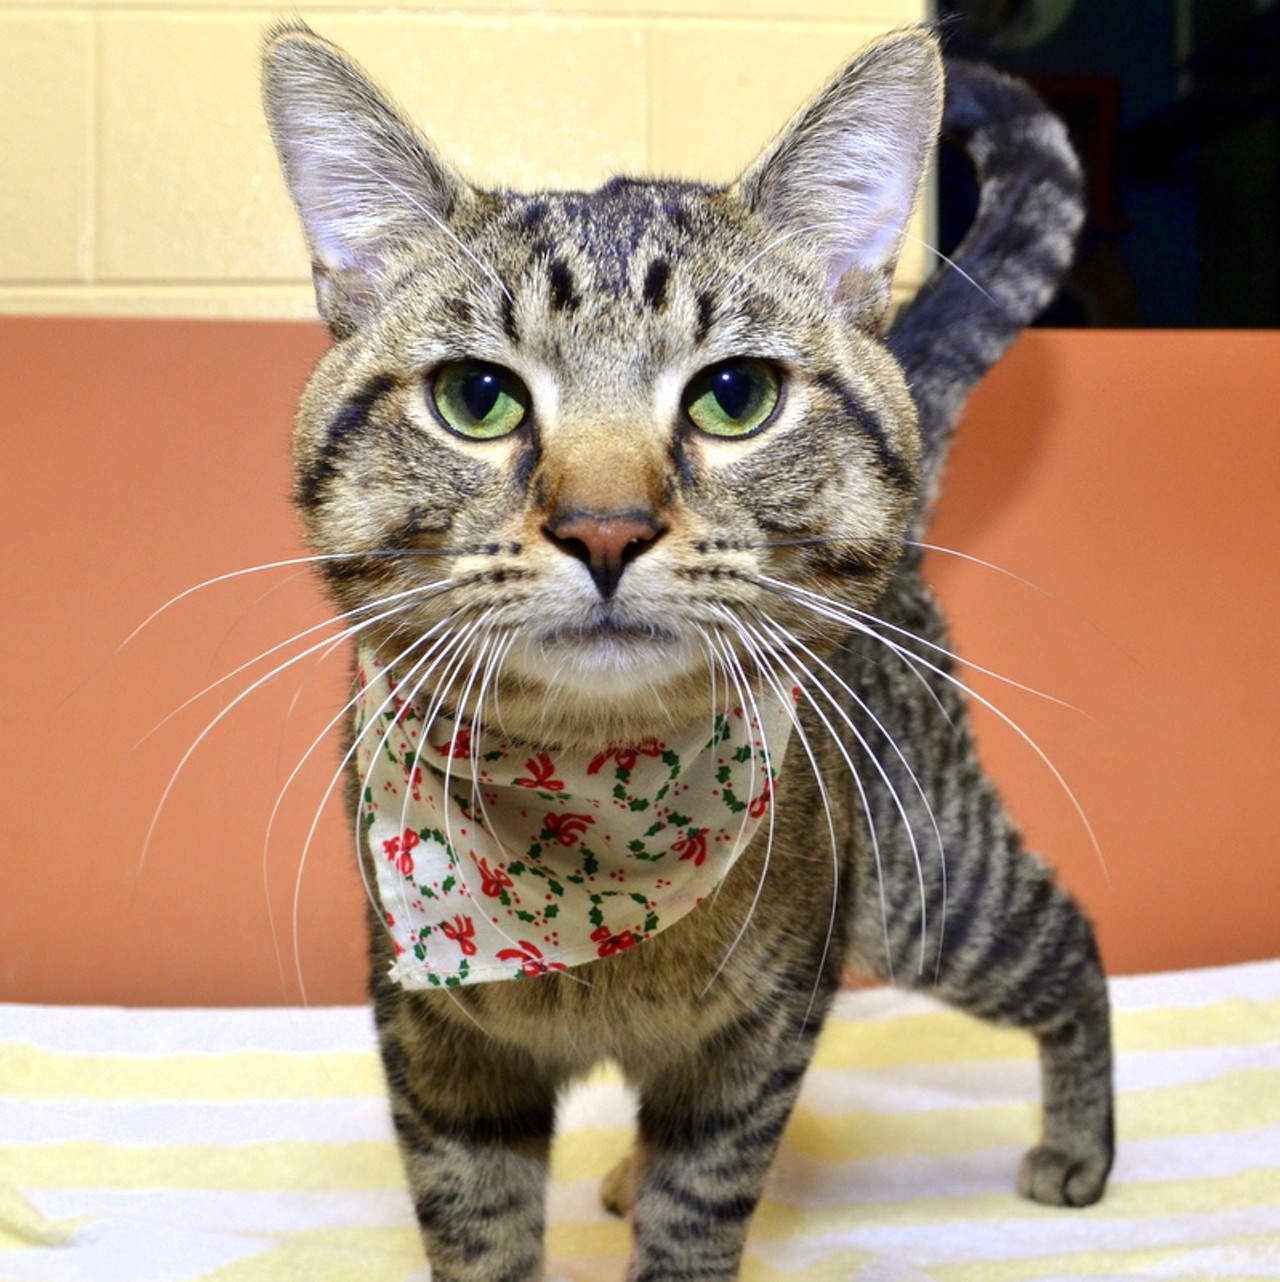 NAME: Julius
GENDER: Male
BREED: Domestic Short Hair
AGE: 1 year
WEIGHT: 12 pounds
SPECIAL CONSIDERATIONS: Introduce to other cats very slowly
REASON I CAME TO MHS: Homeless in Highland
LOCATION: Berman Center for Animal Care in Westland
ID NUMBER: 863170